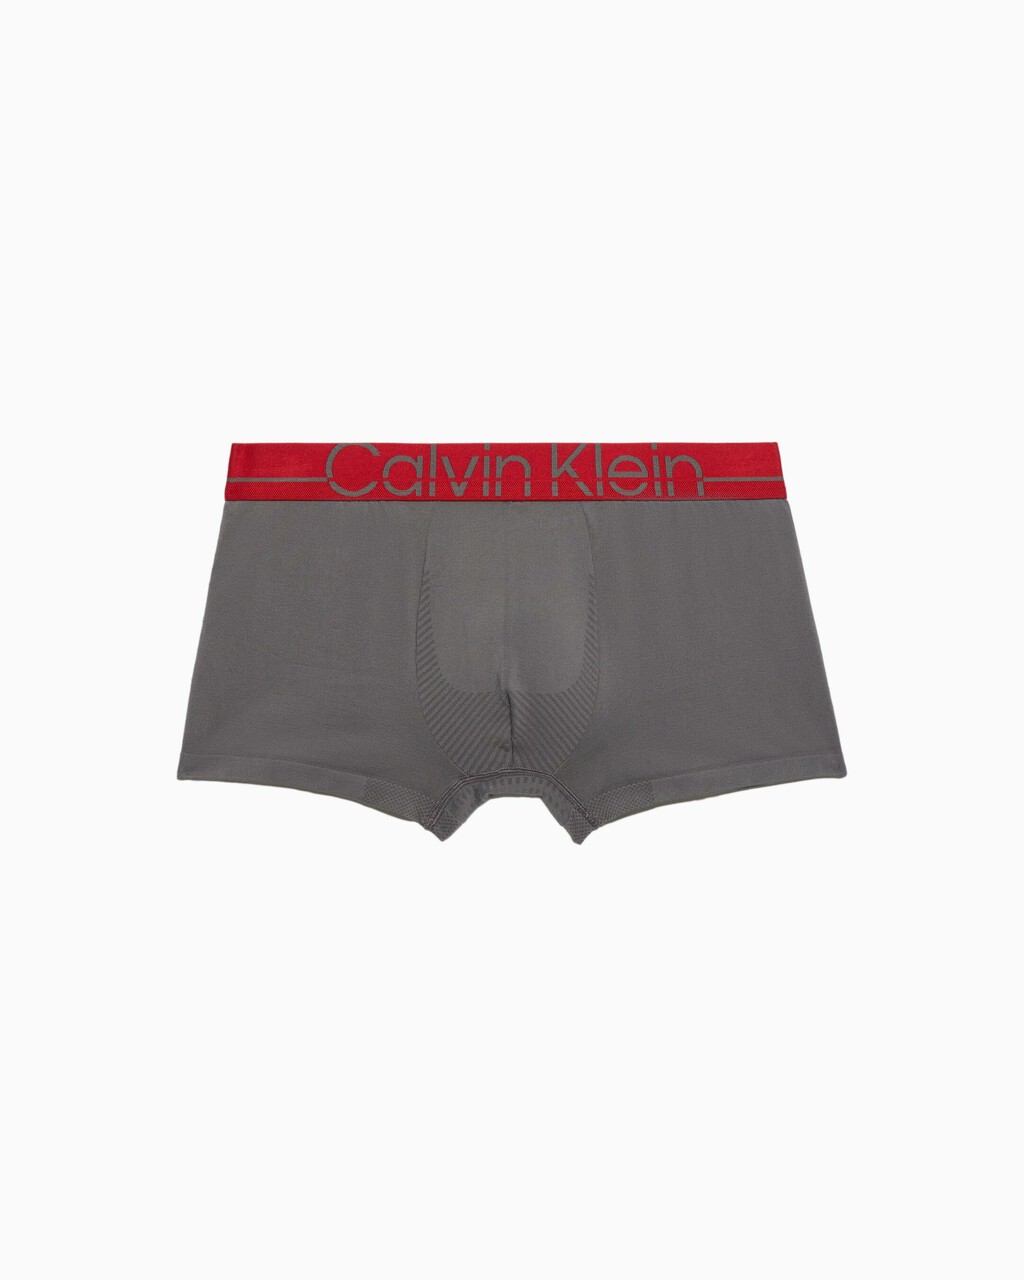 PRO FIT MICRO LOW RISE TRUNKS, Grey Sky, hi-res